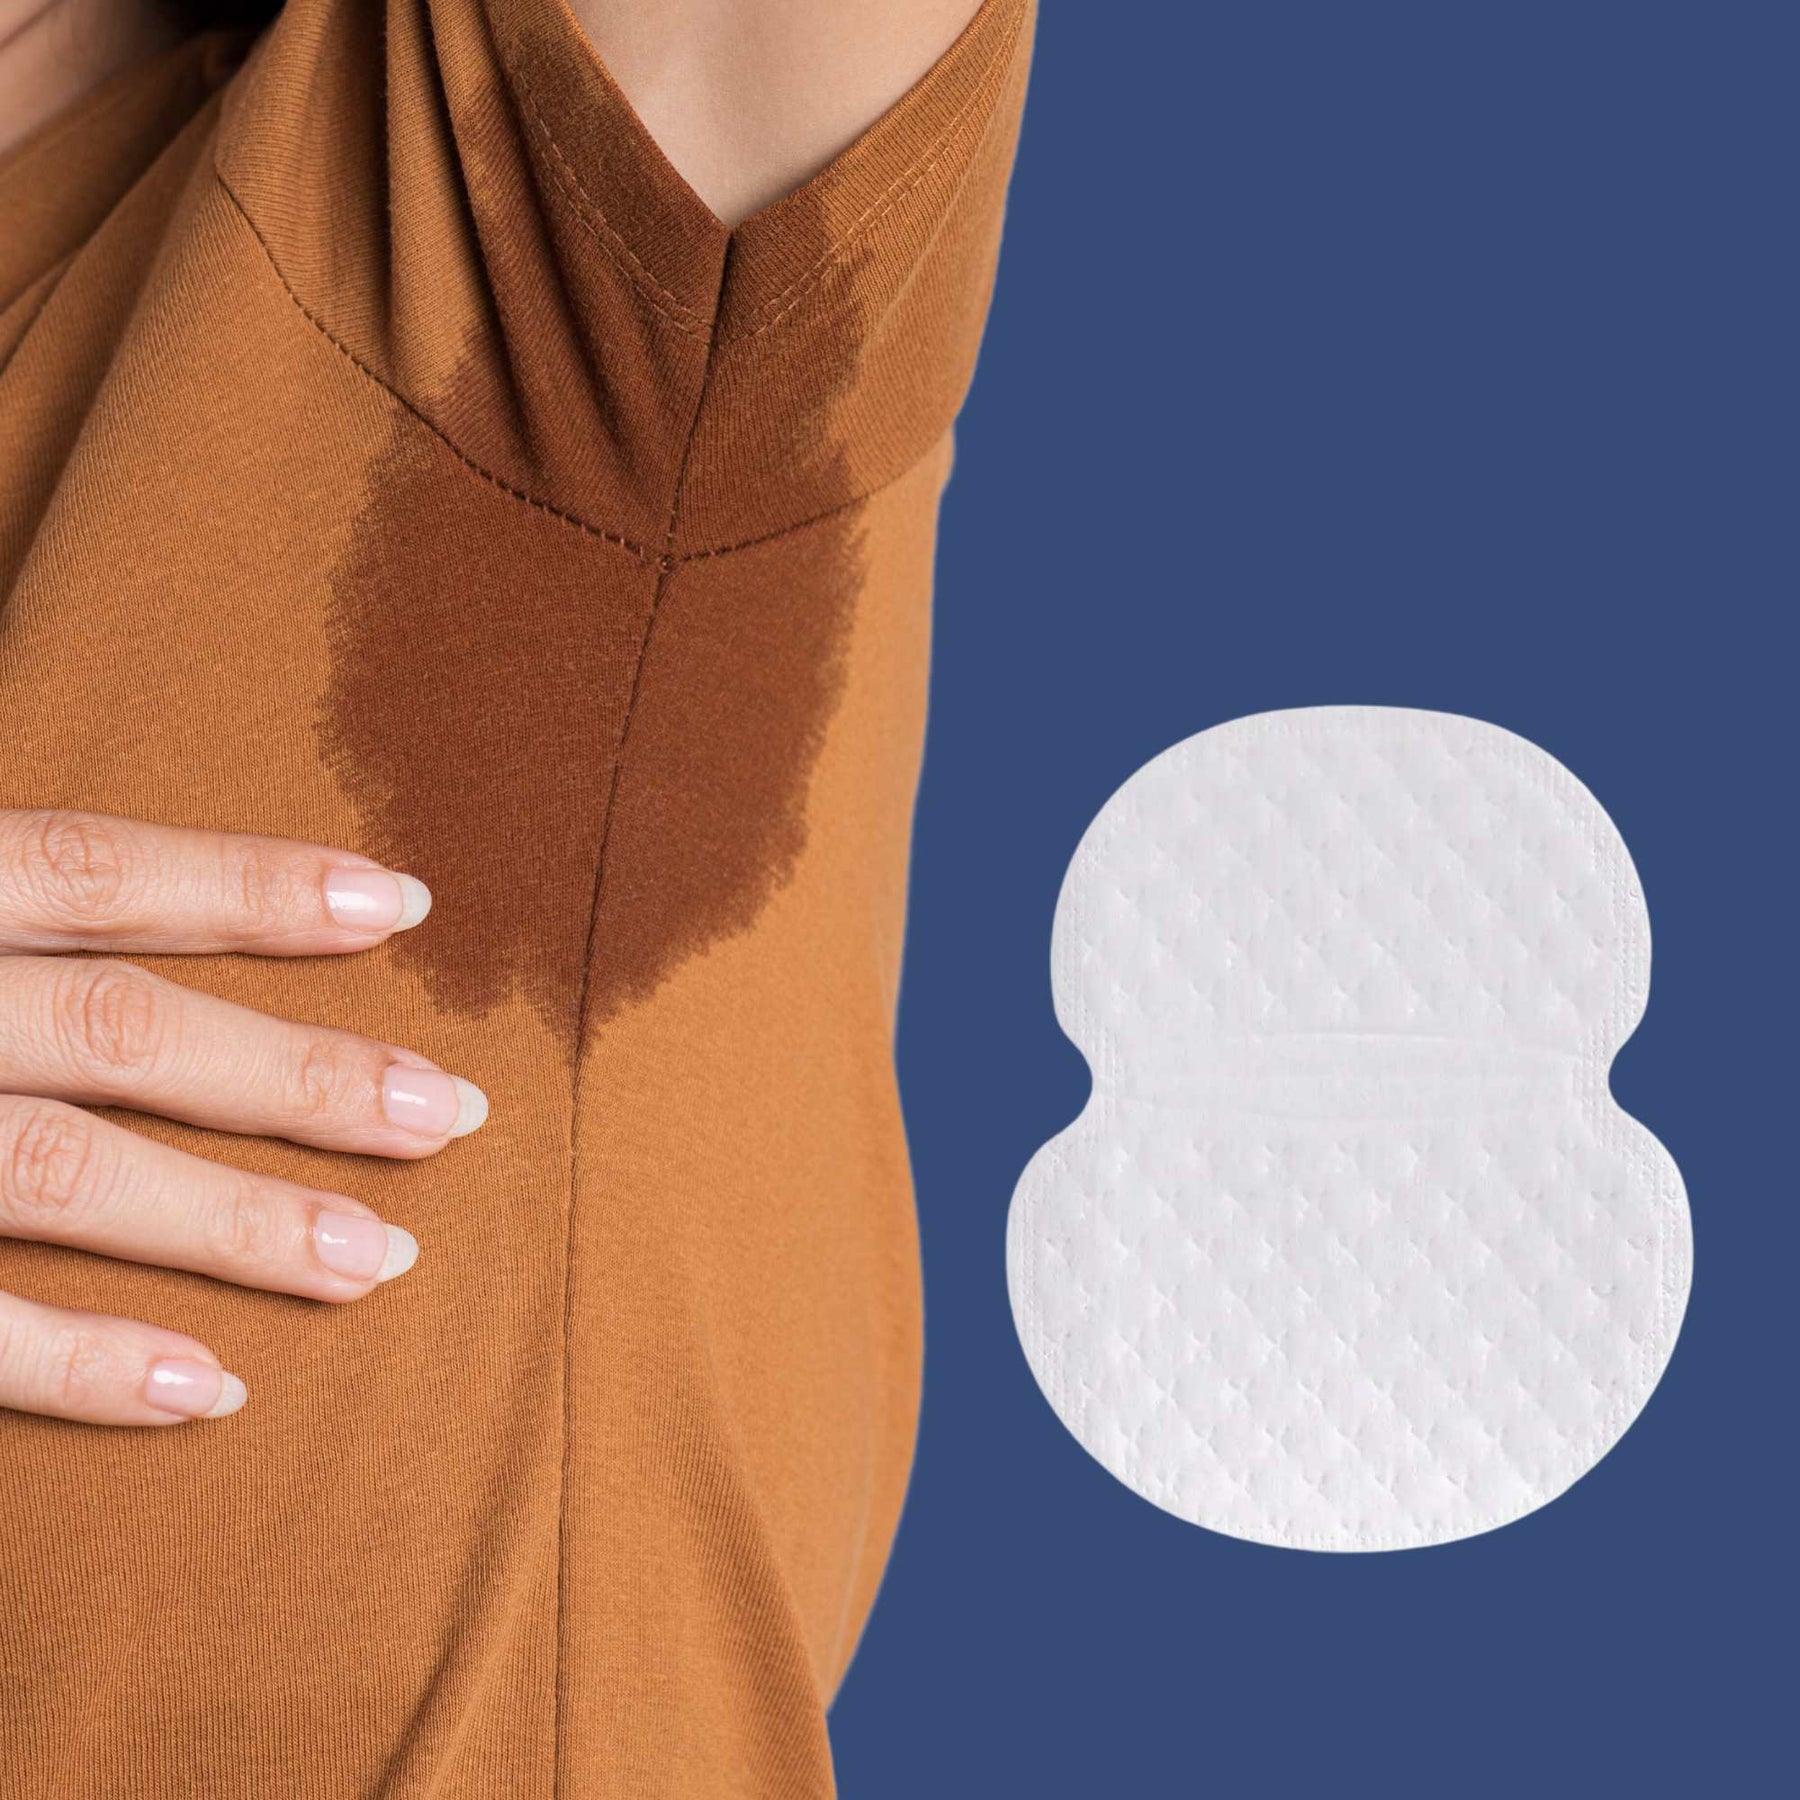 Sweat pads for Underarms, Blocks Sweat and Stains